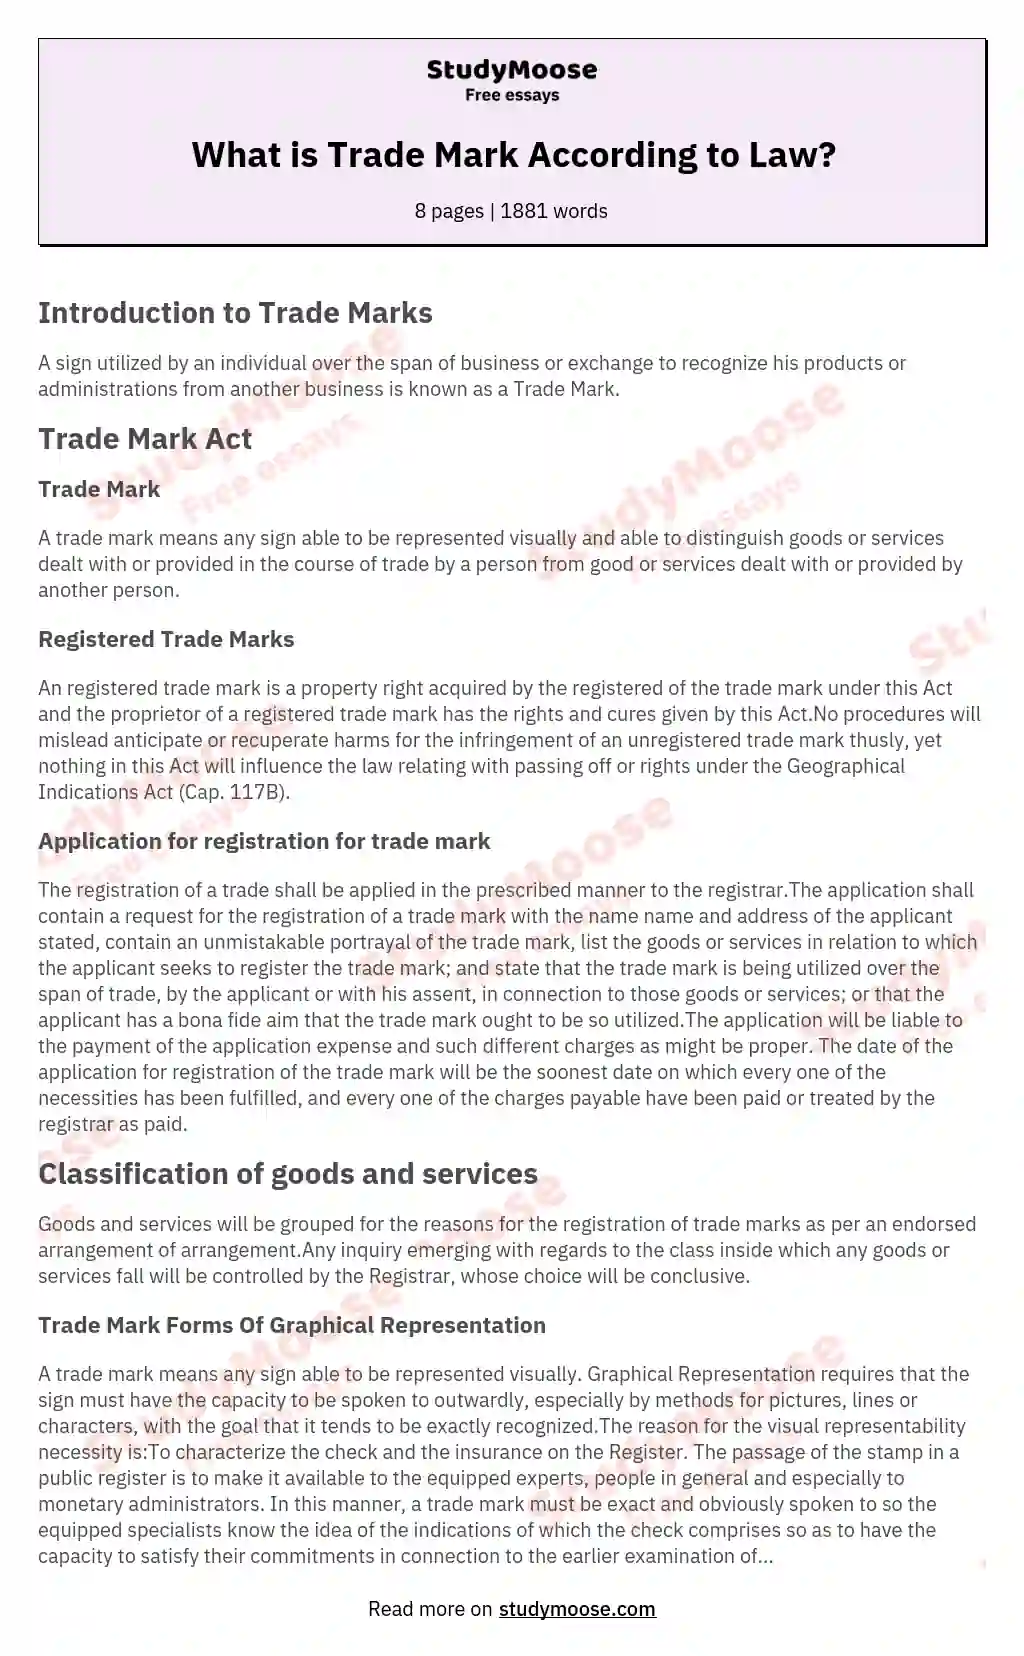 What is Trade Mark According to Law? essay